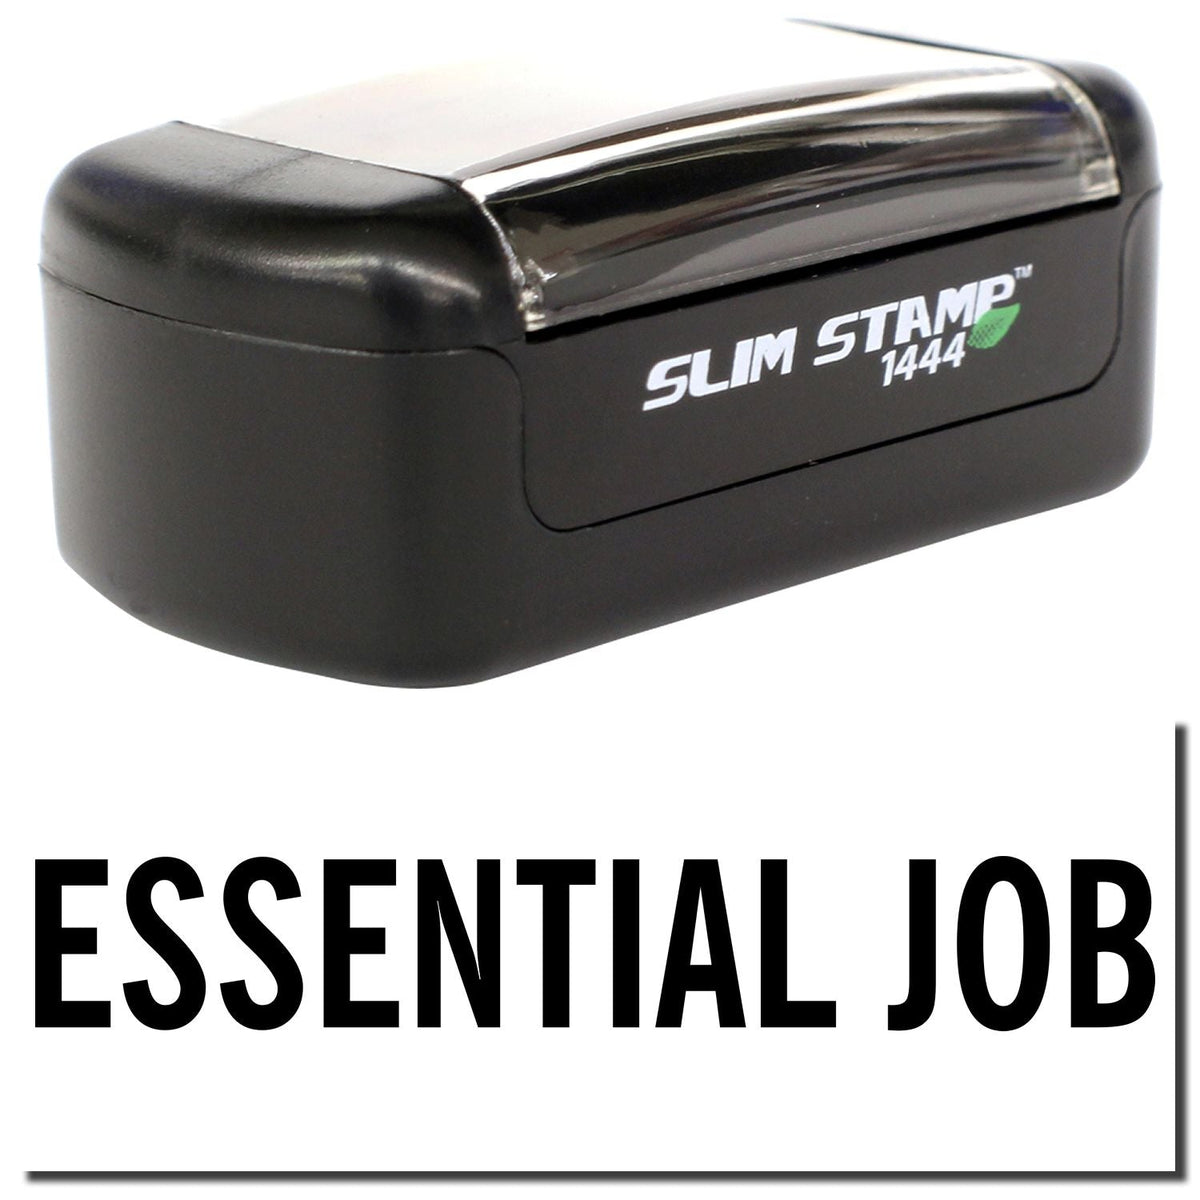 A stock office pre-inked stamp with a stamped image showing how the text &quot;ESSENTIAL JOB&quot; is displayed after stamping.